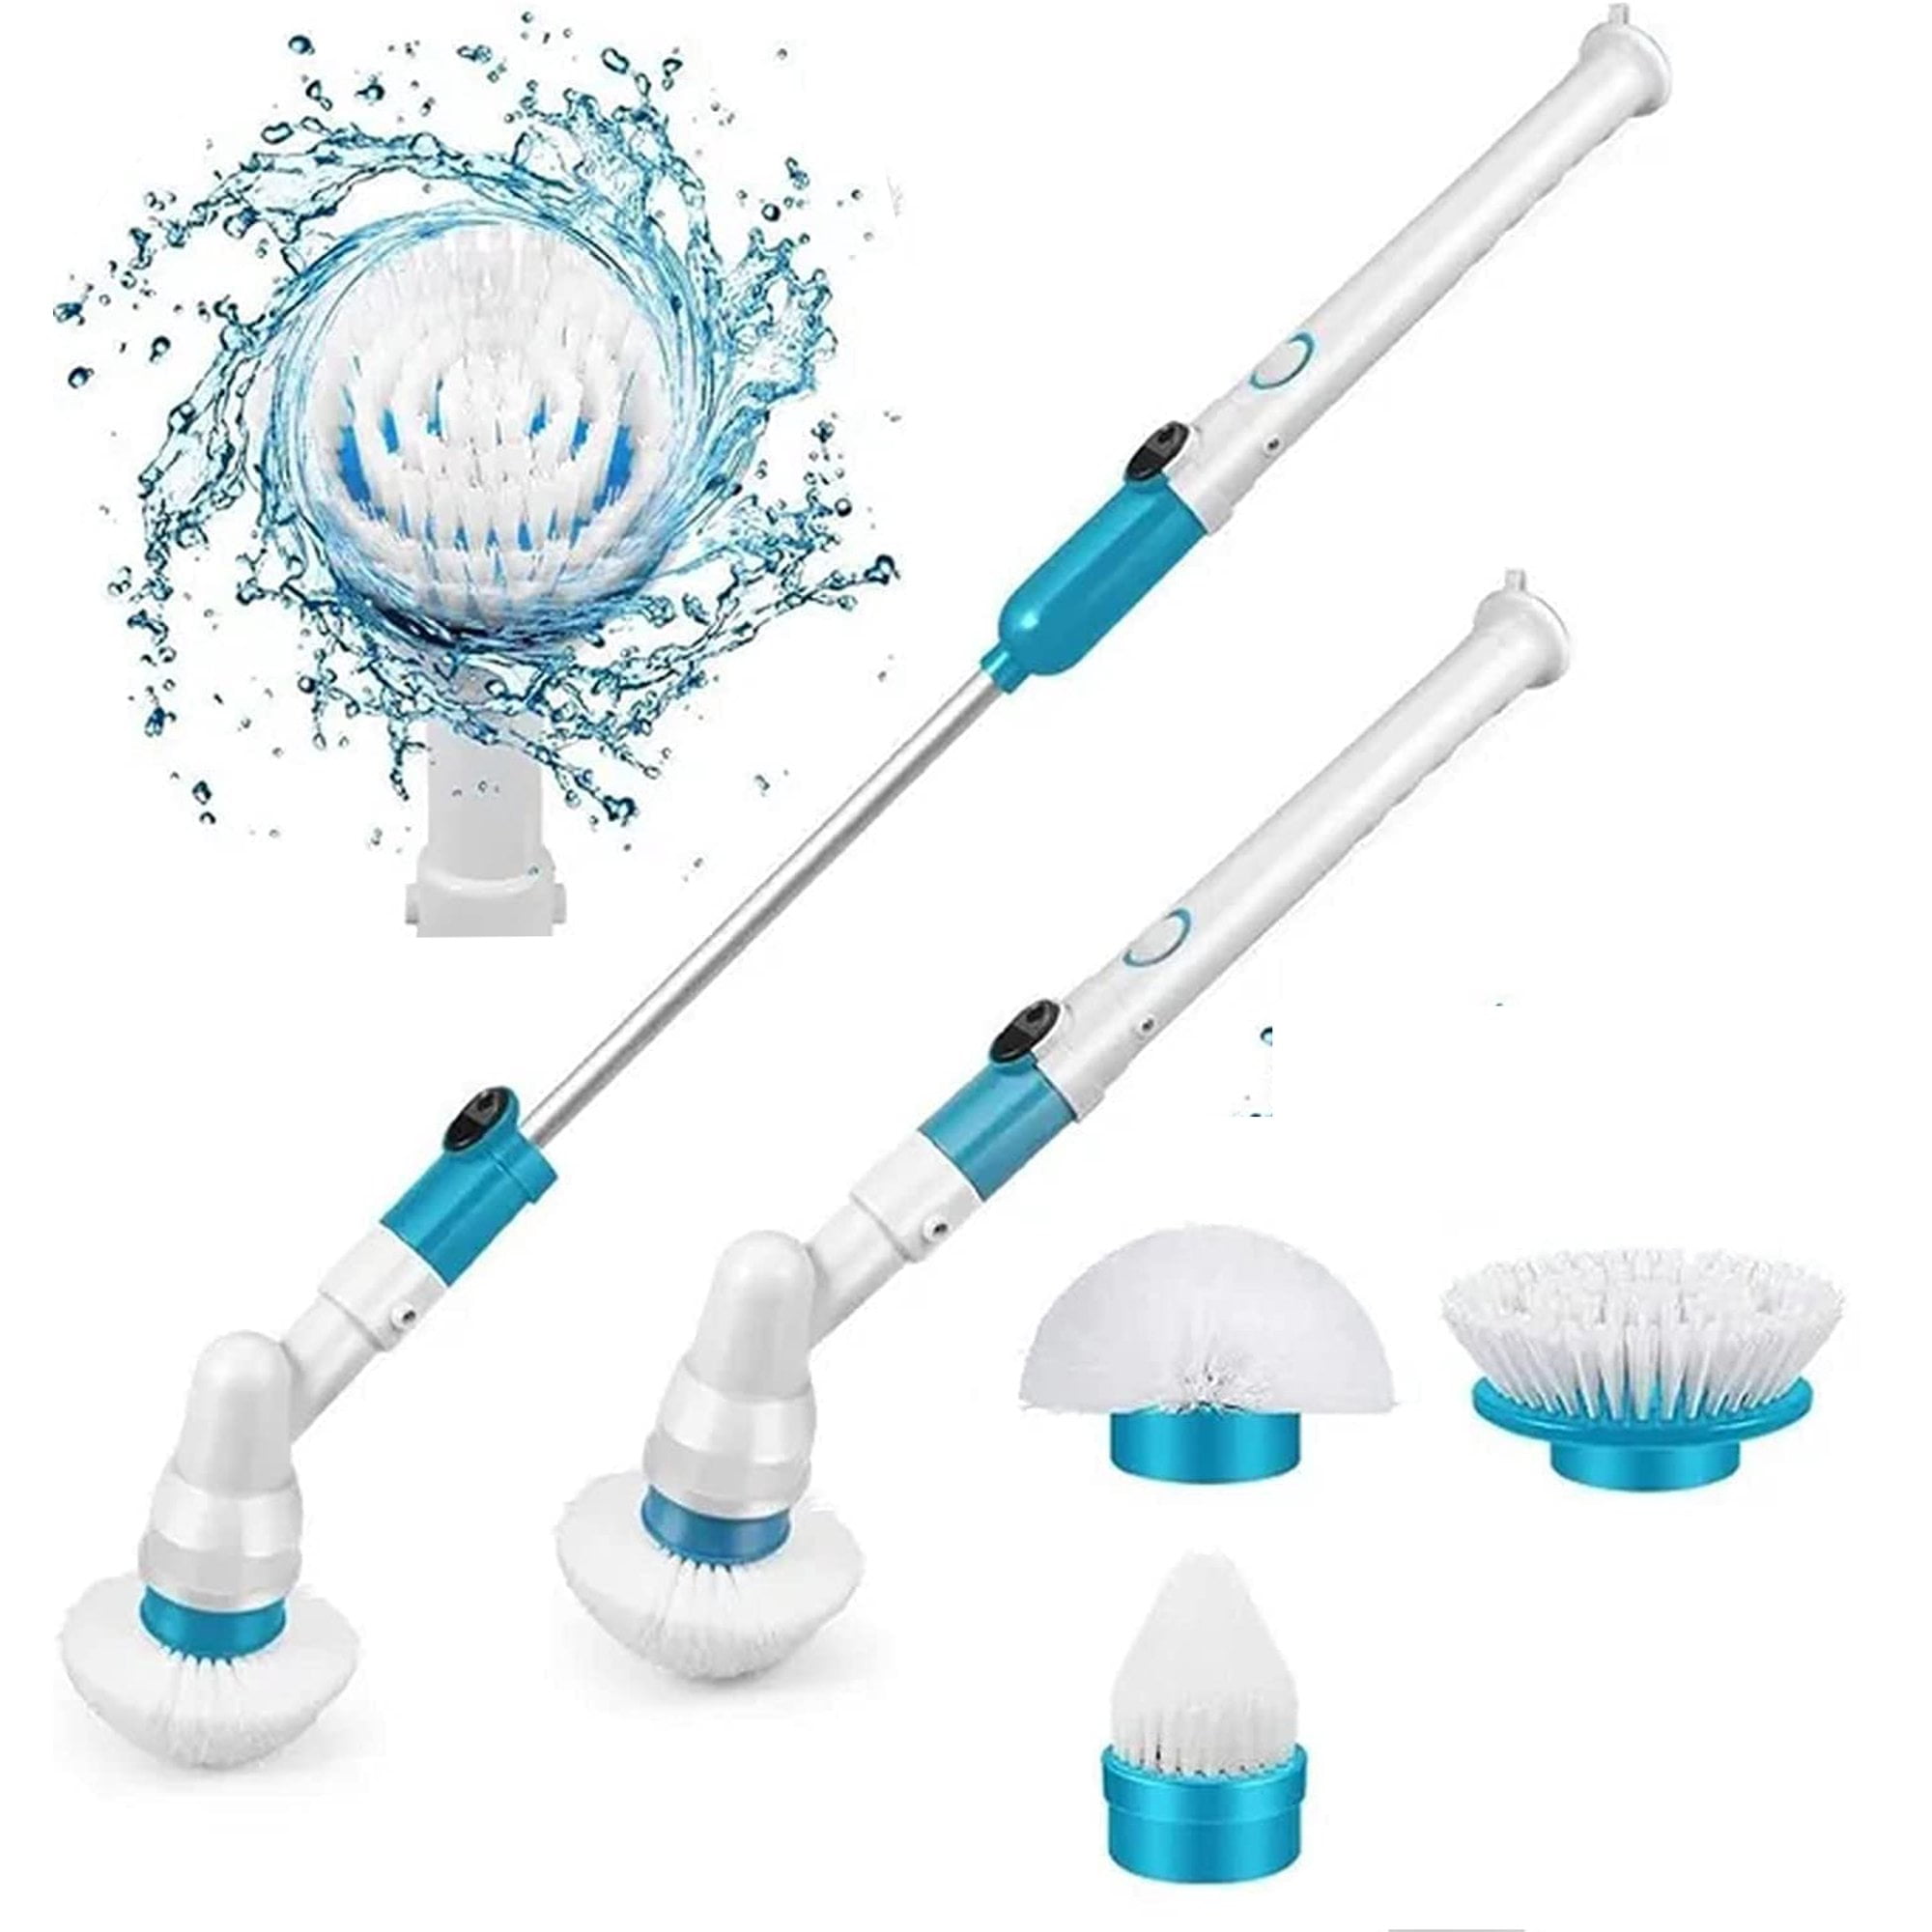 Untimaty Electric Spin Scrubber, Cordless Cleaning Brush with 8 Replaceable Brush Heads, Extension Handle for Tub, Tile, Wall, Bathroom, White